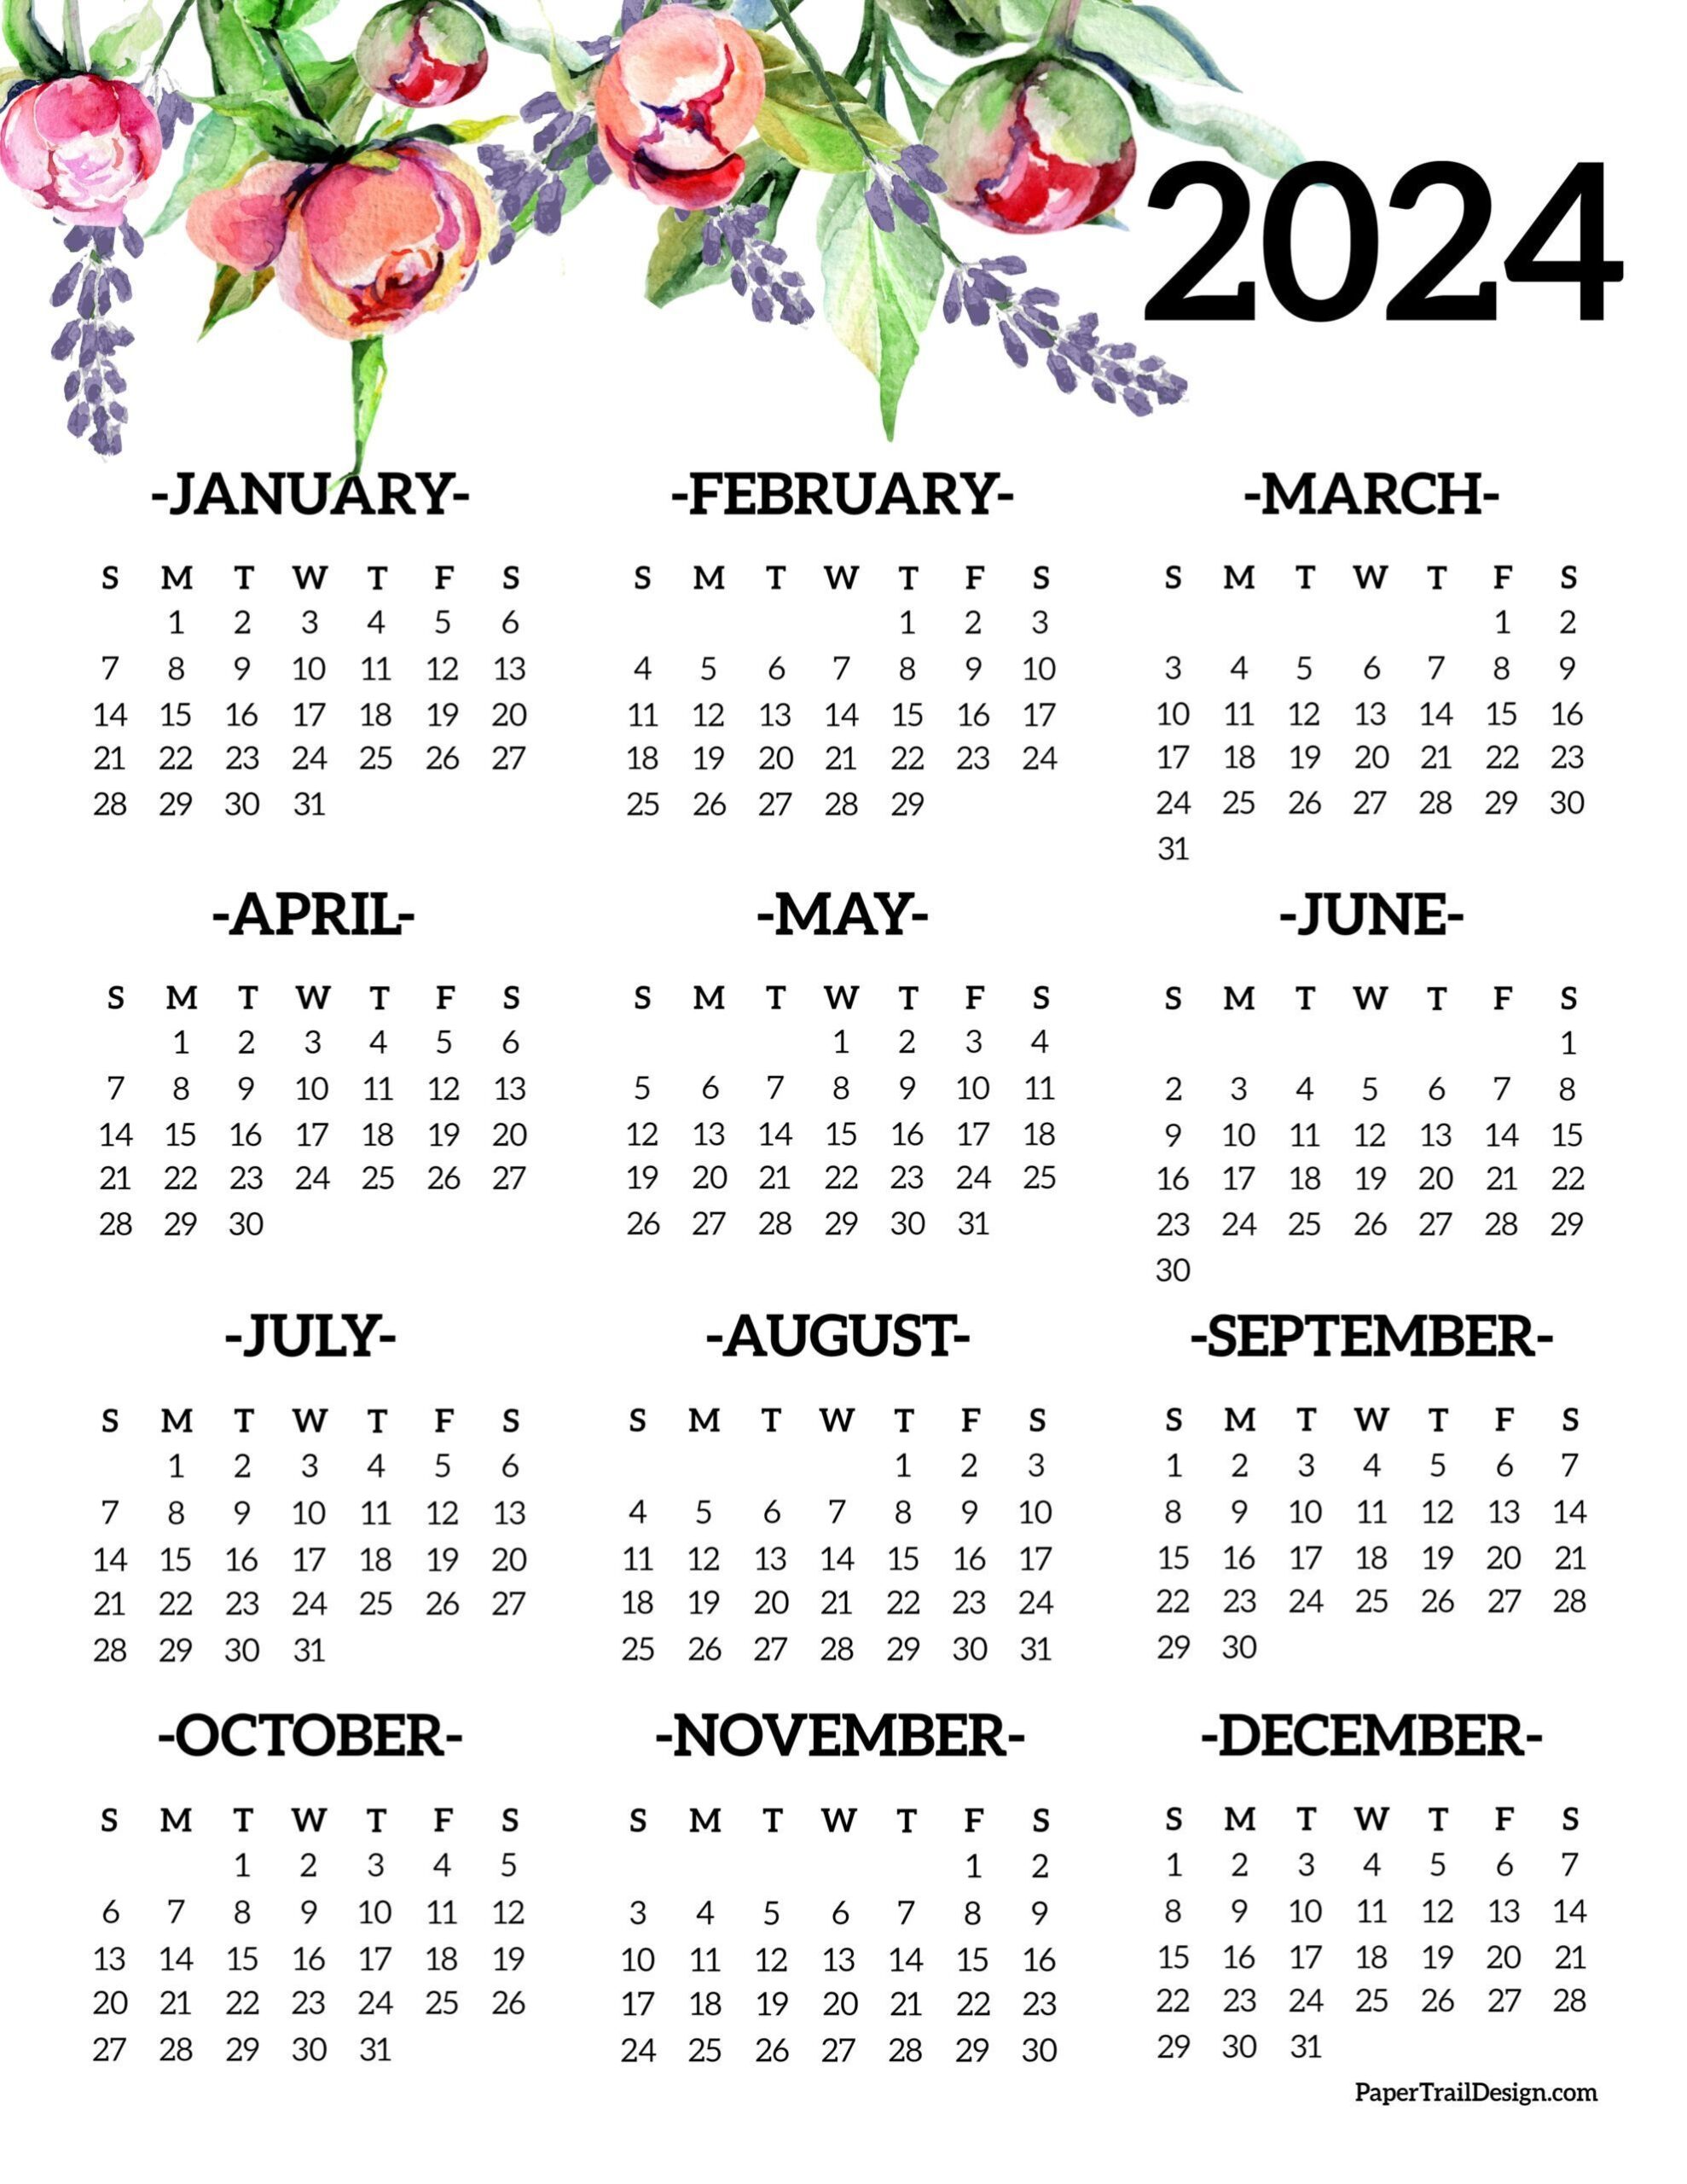 Calendar 2024 Printable One Page | Paper Trail Design | Free throughout Free Printable Calendar 2024 Pinterest